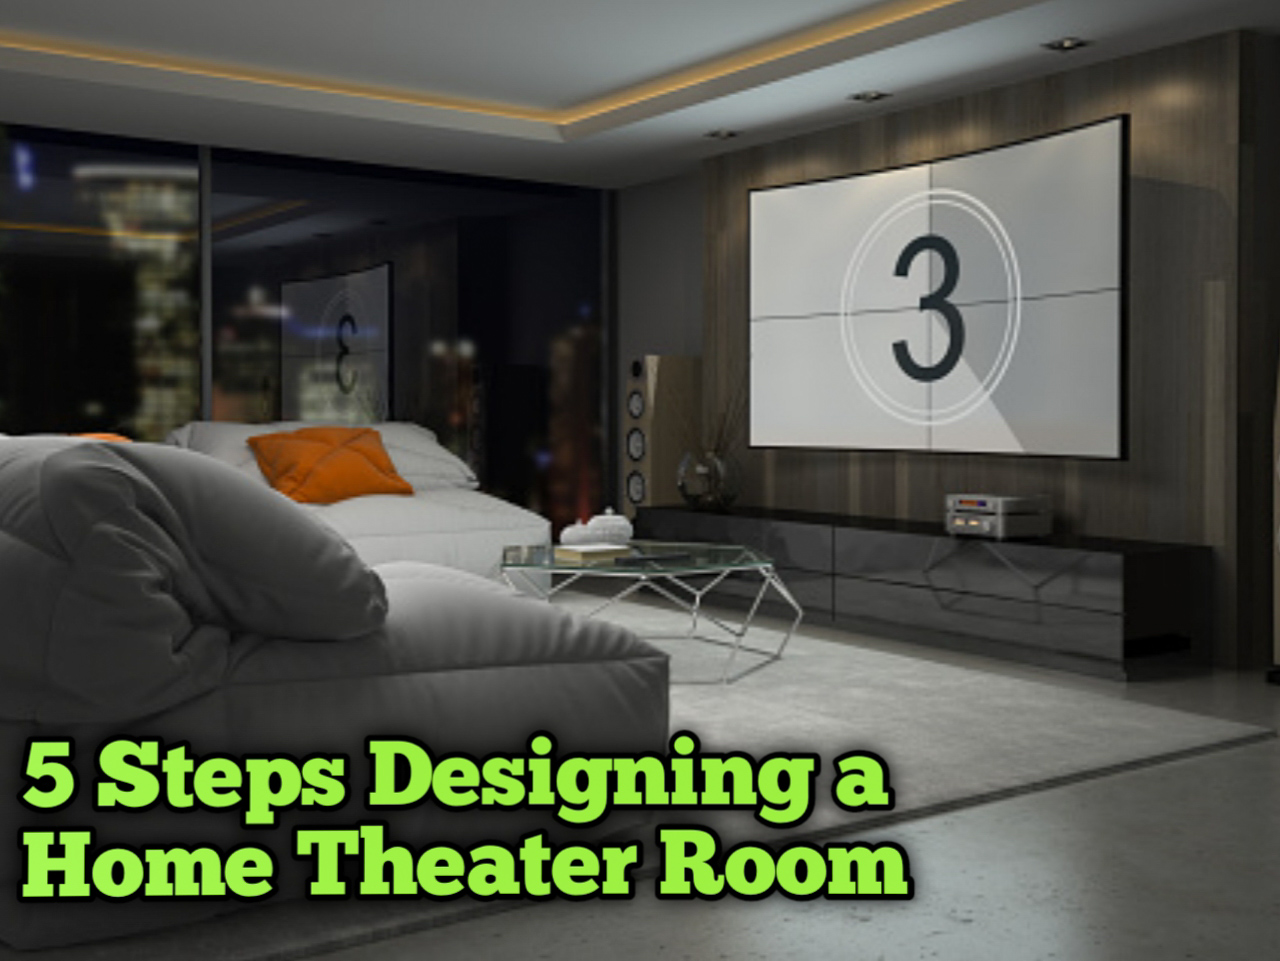 5 Steps Designing a Home Theater Room